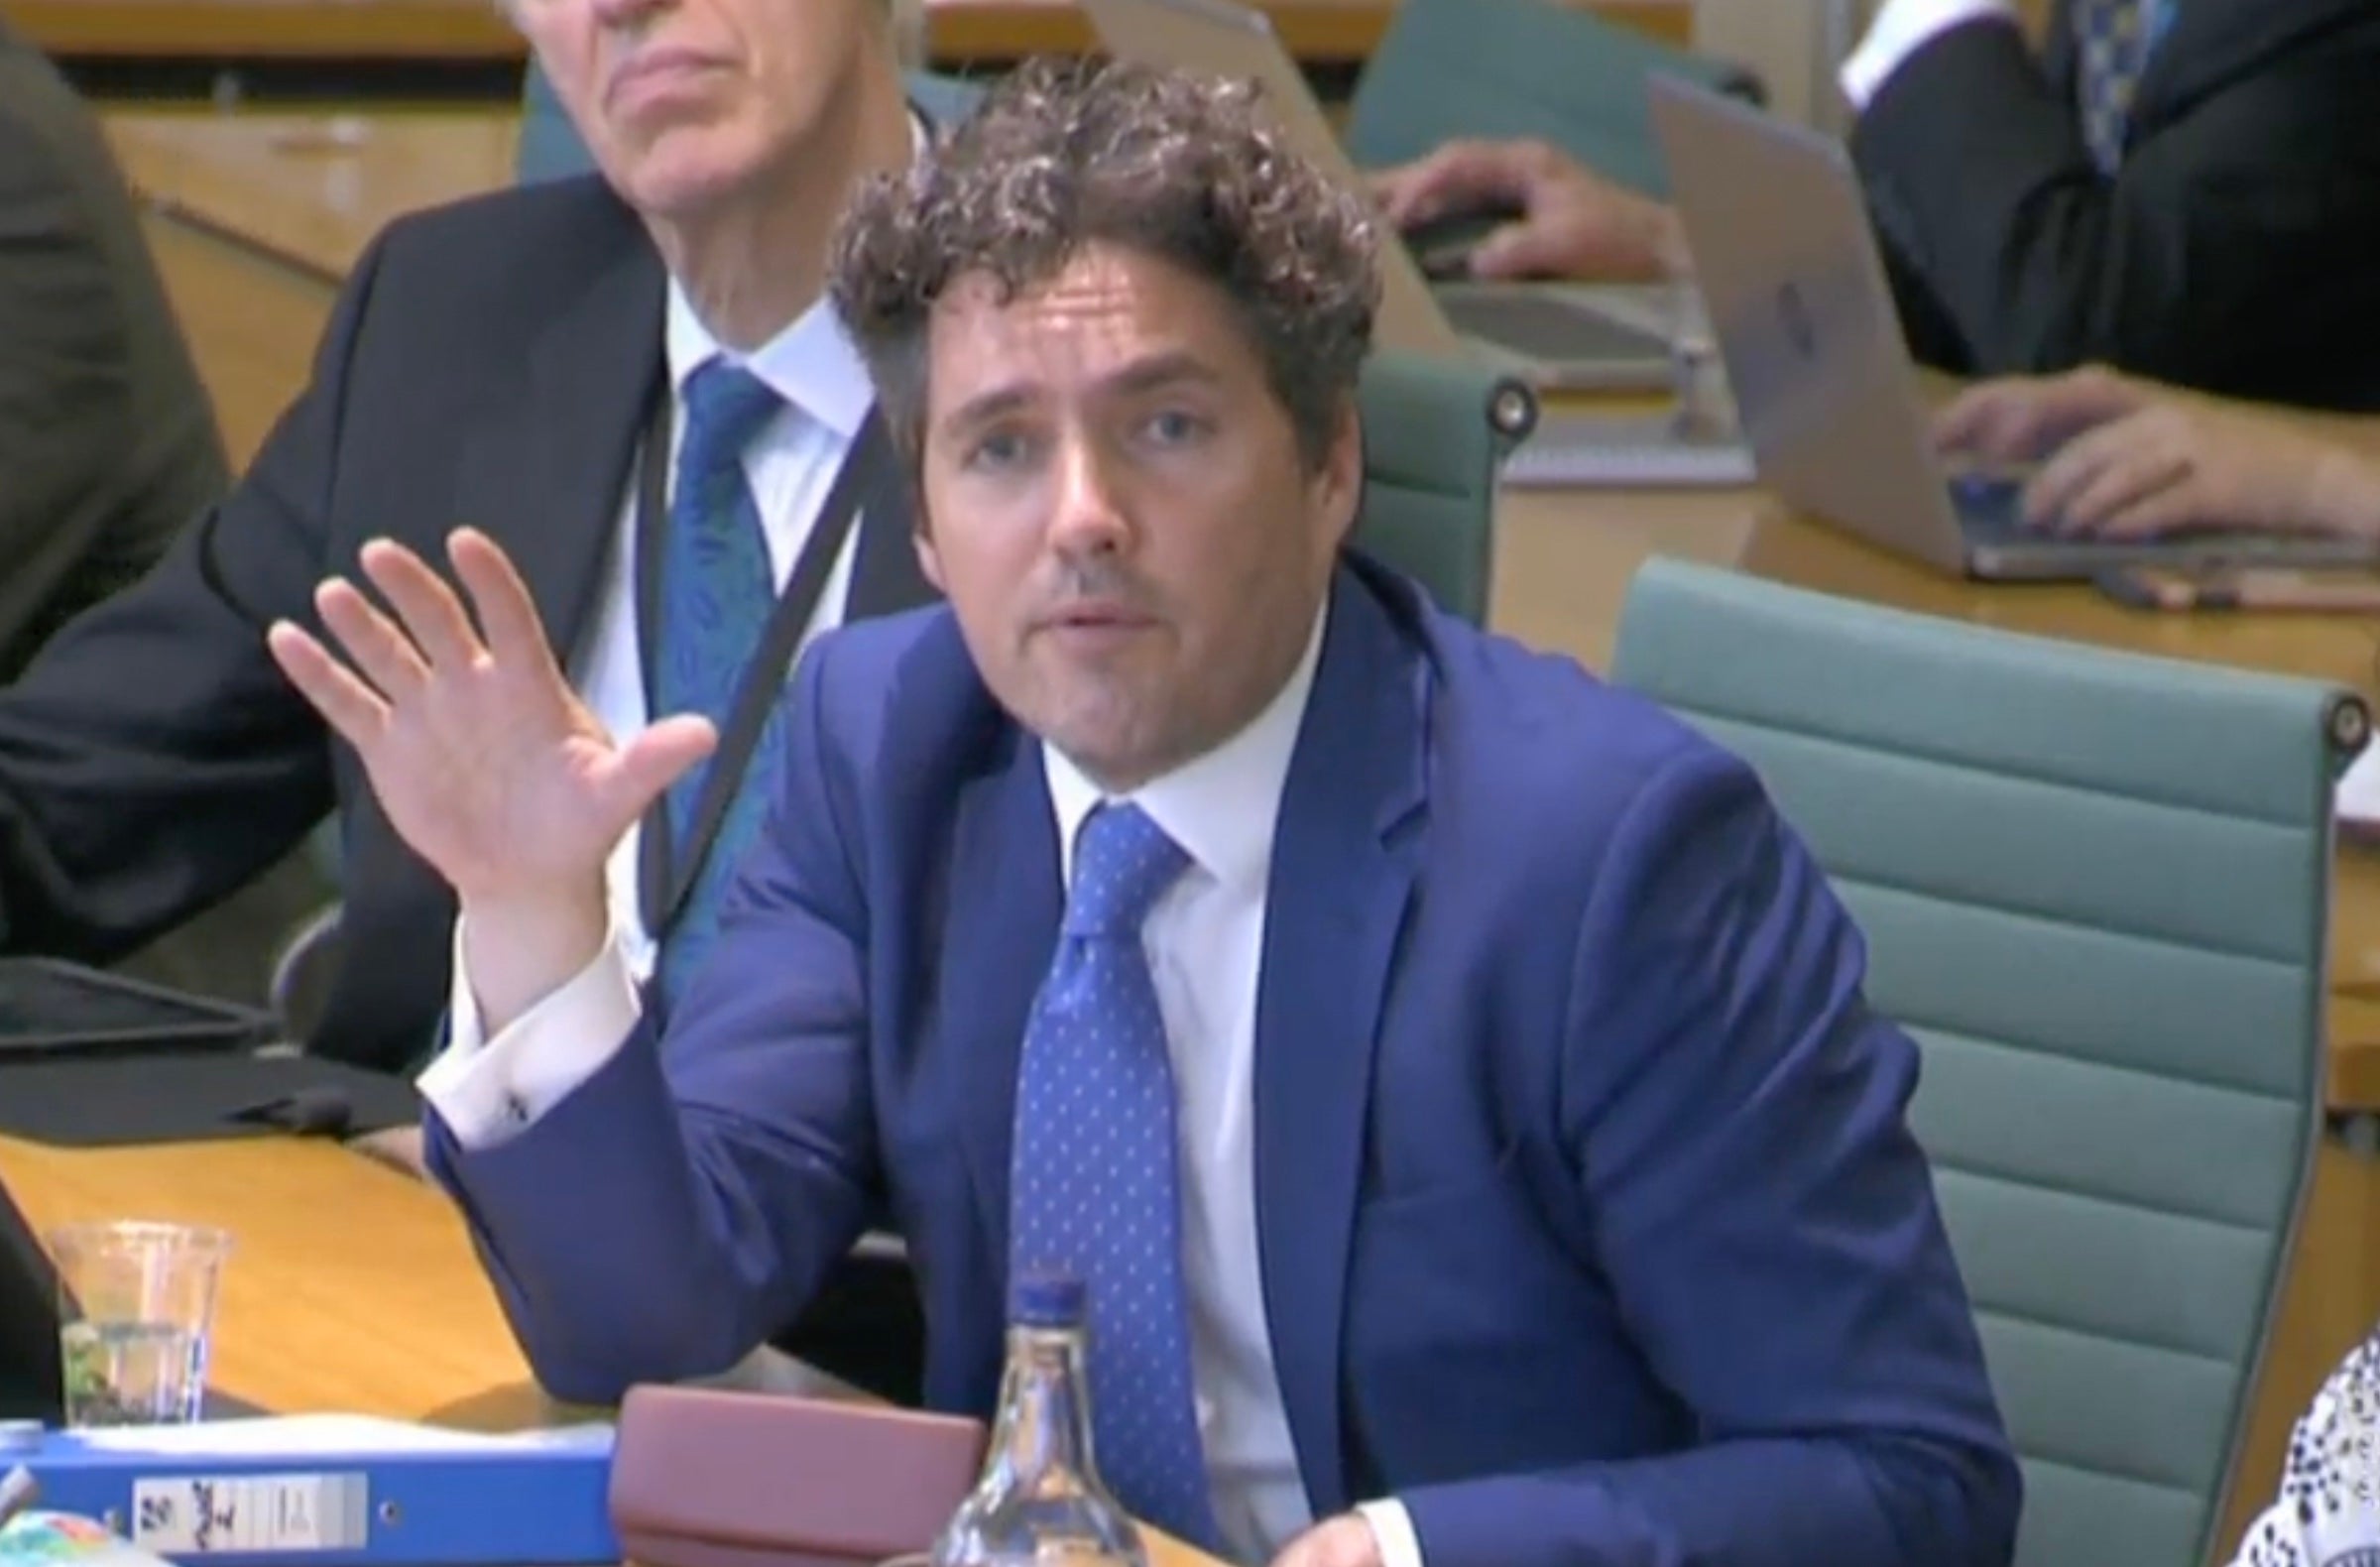 Huw Merriman said the prime minister’s leadership was untenable and lessons had not been learnt from the Partygate scandal